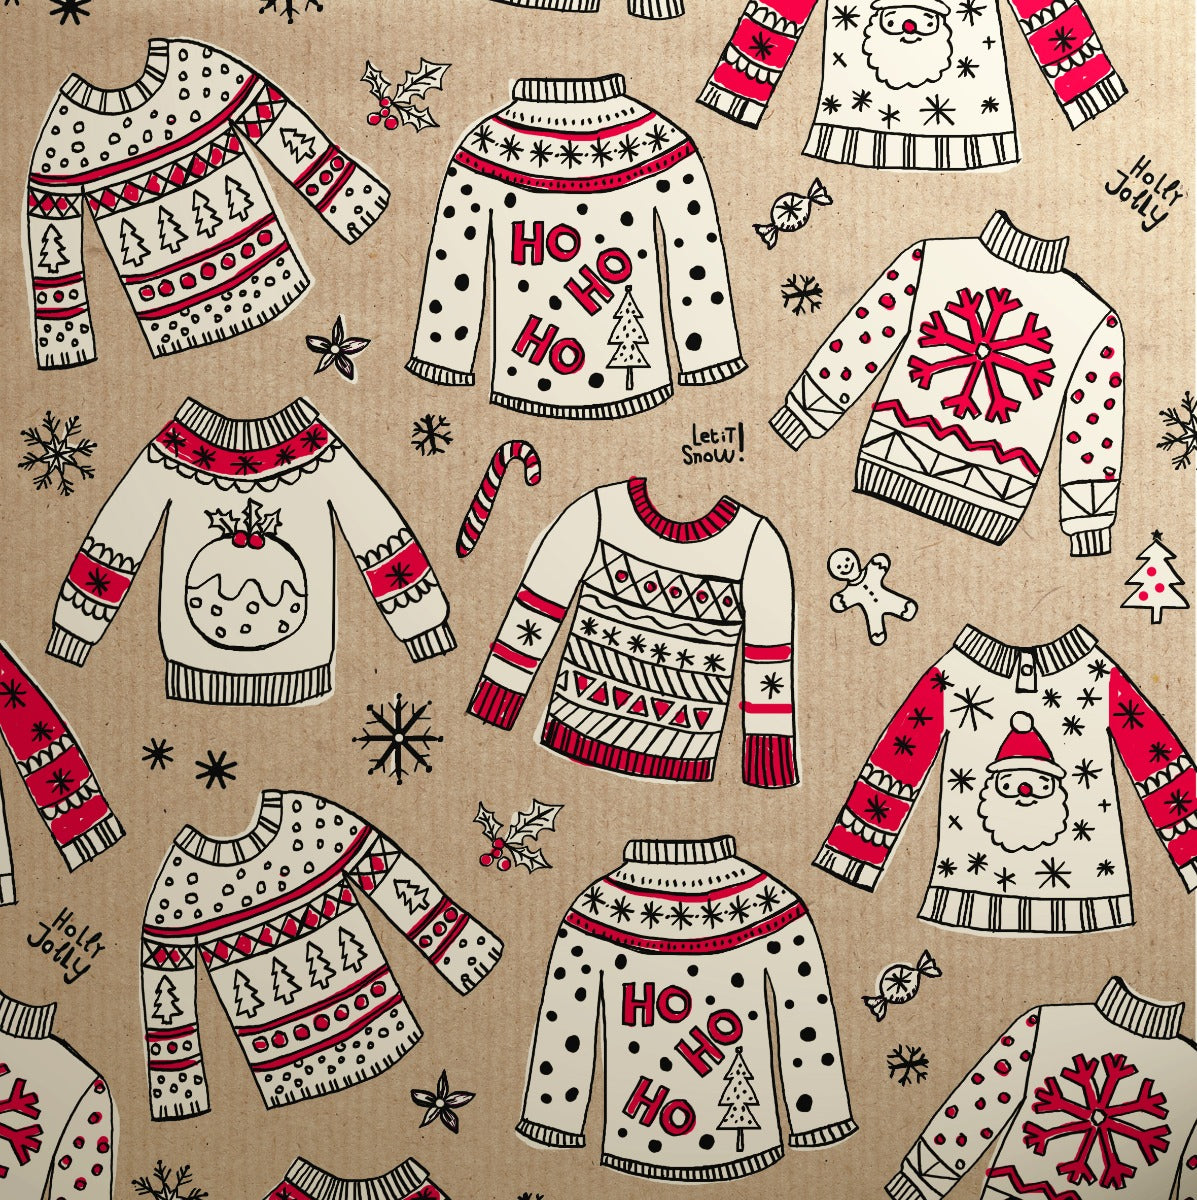 Uniqueco Printed FSCR Doodles Christmas Red Jumpers